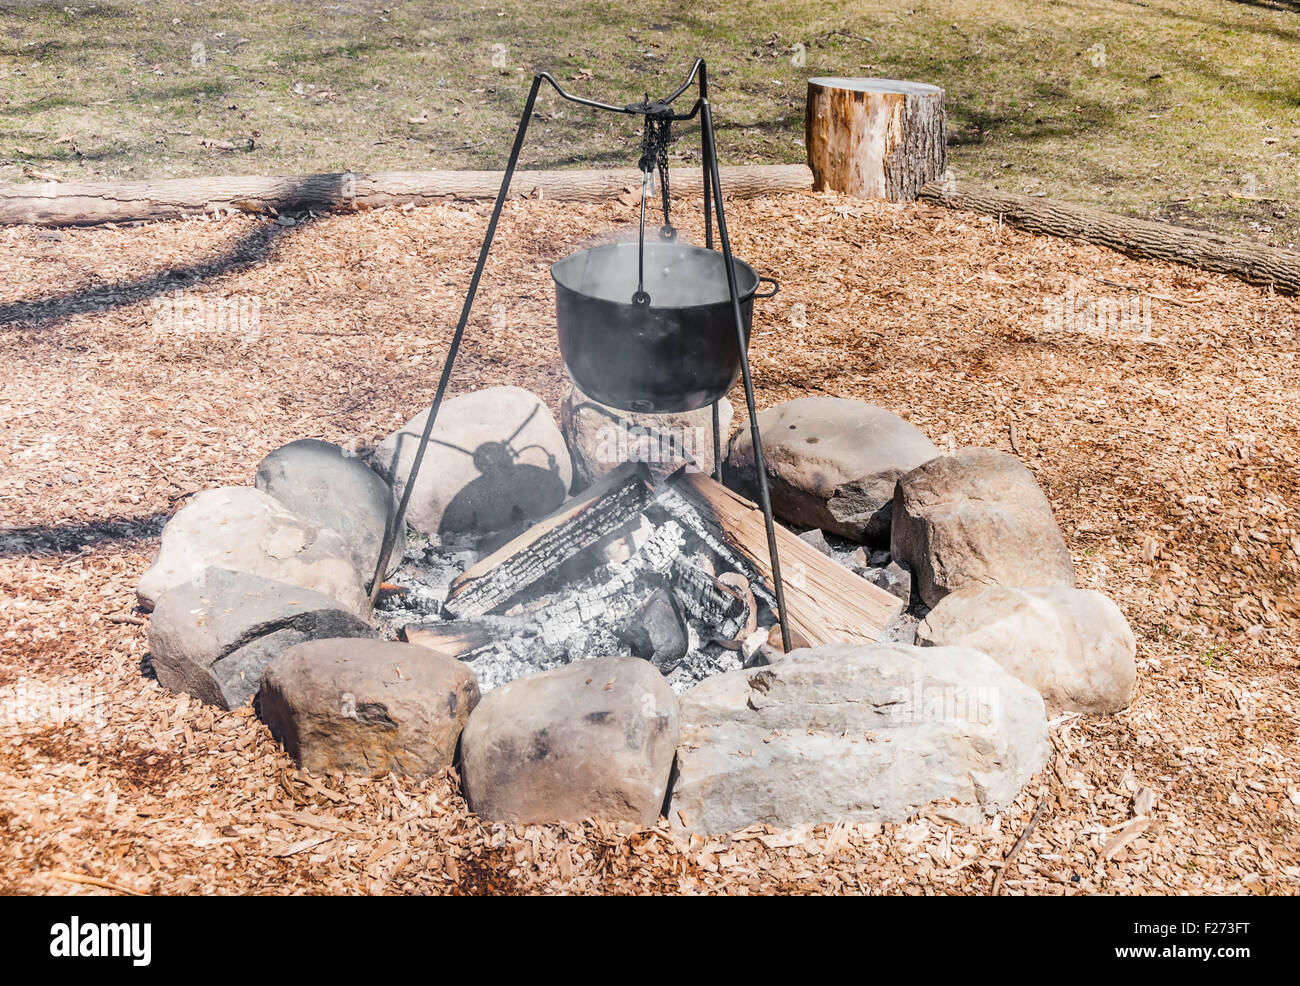 outdoor cooking scene with Cauldron on Campfire Stock Photo